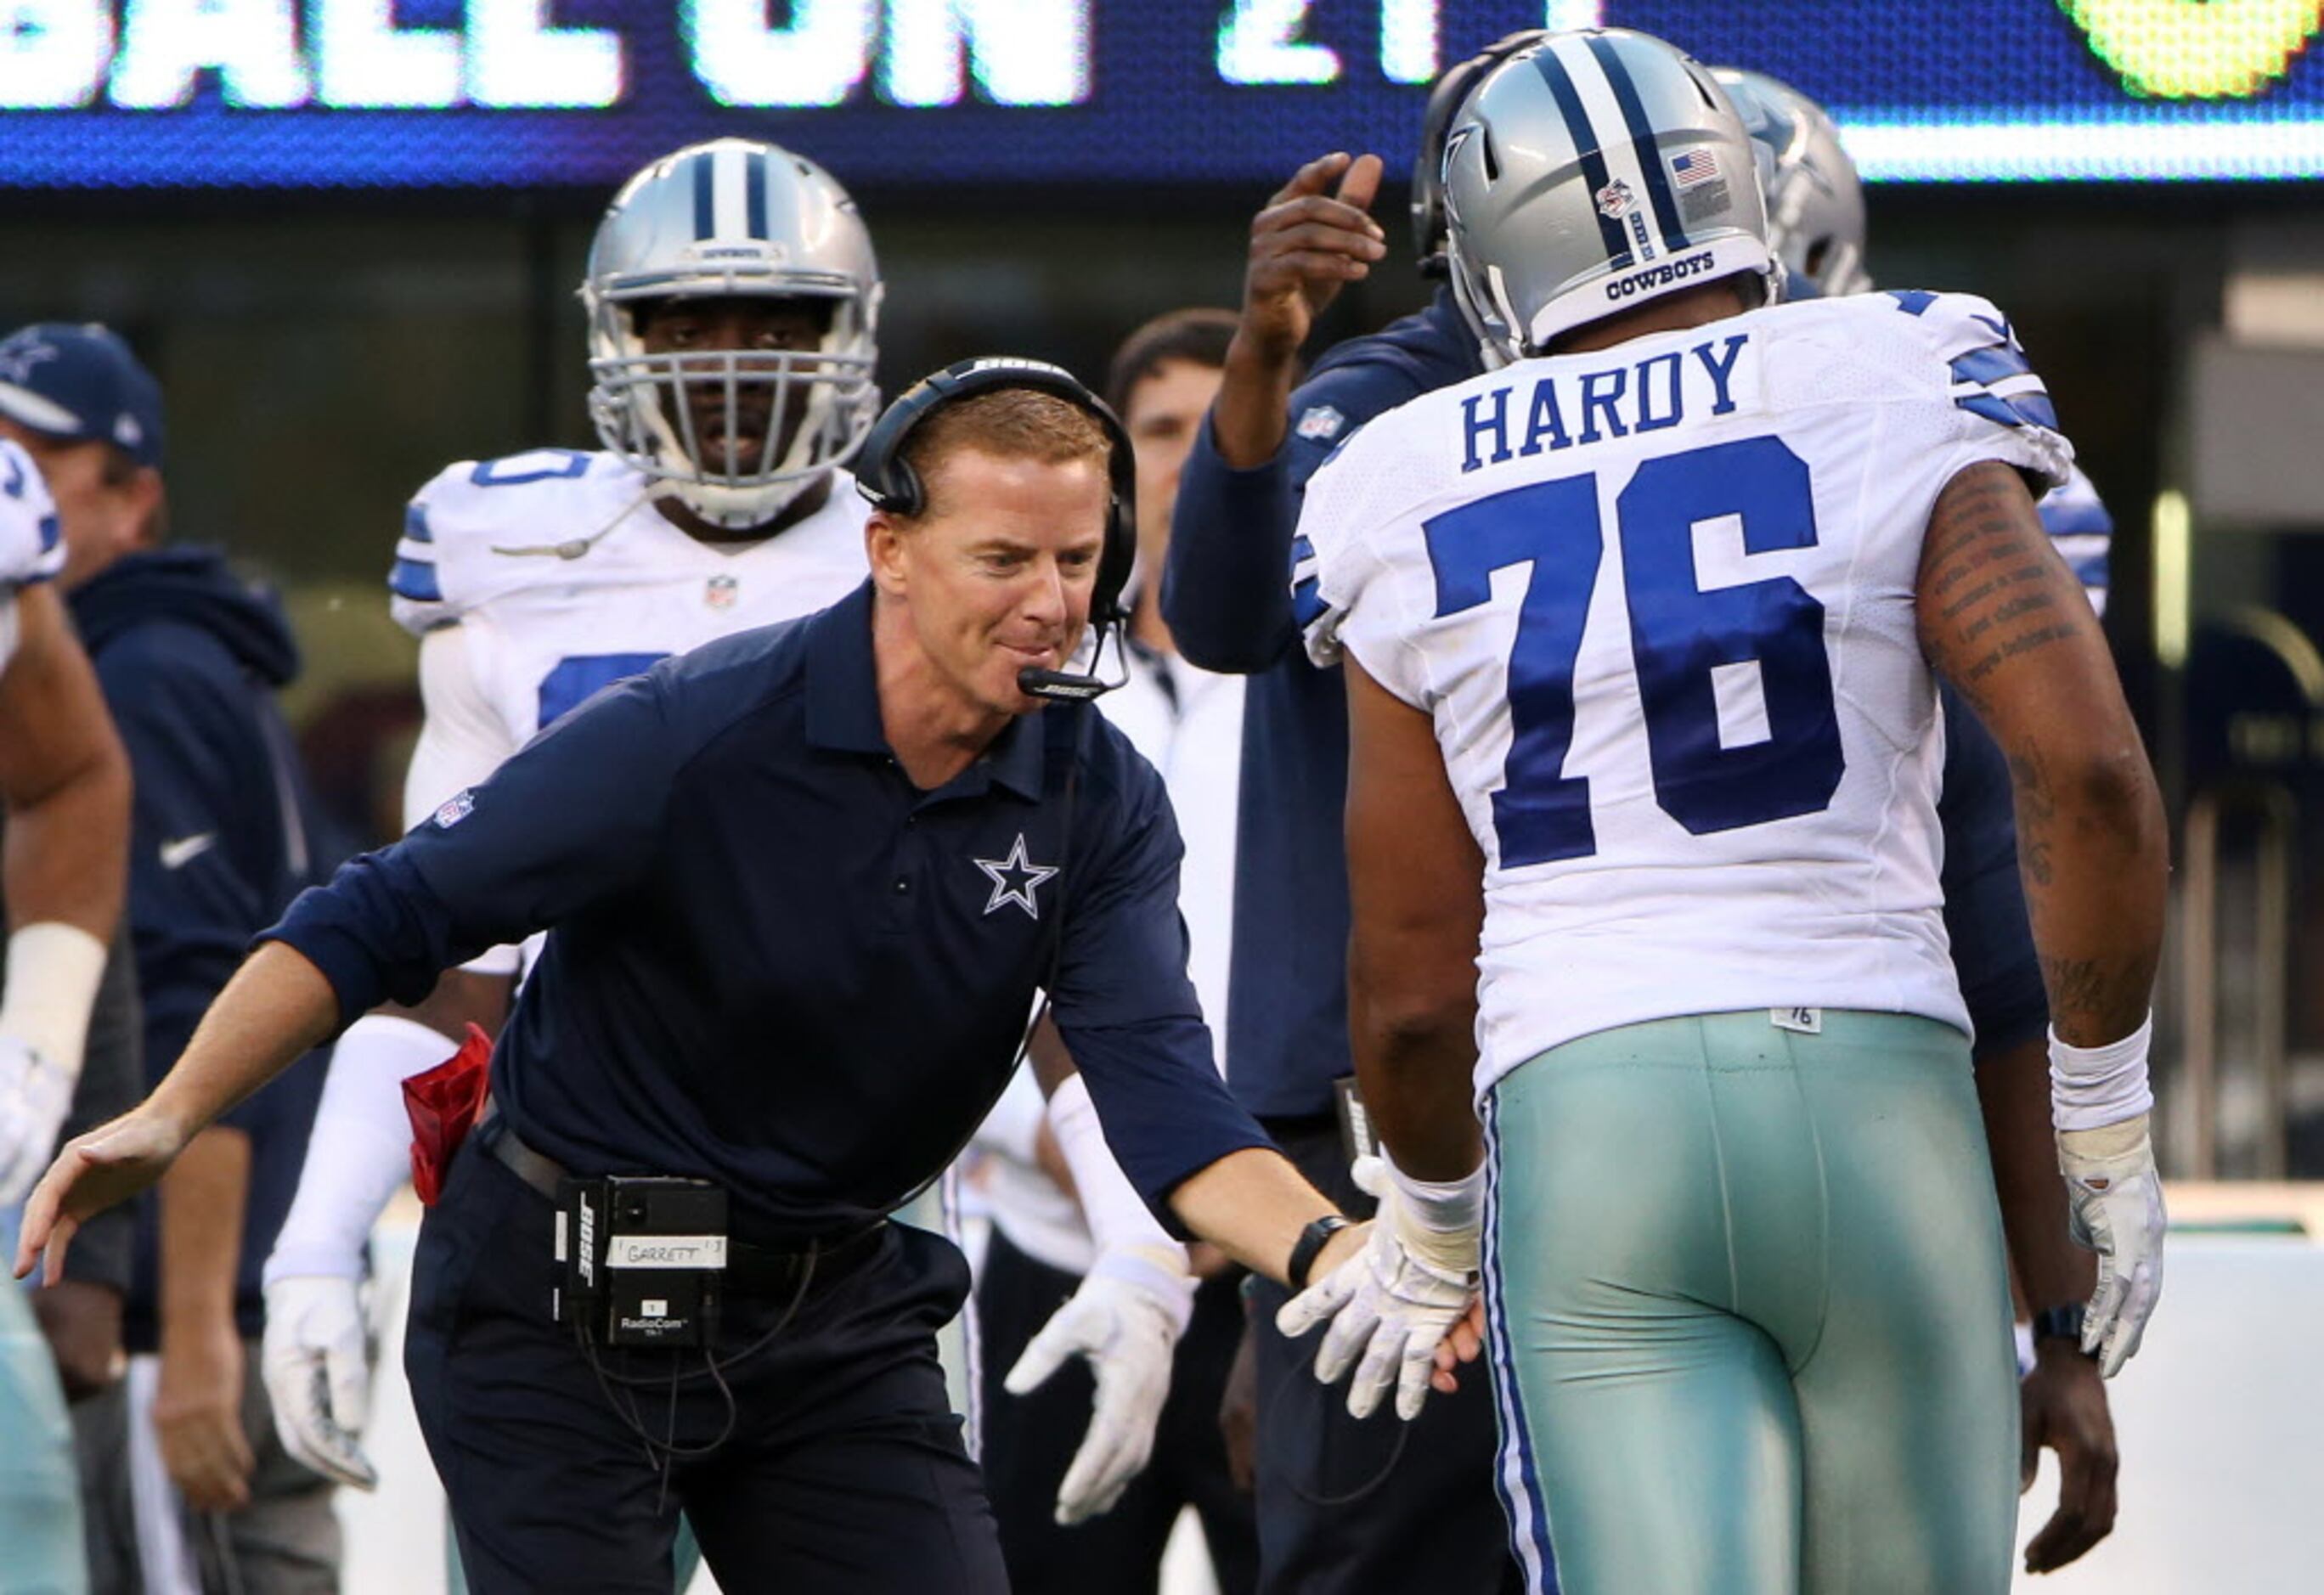 Twitter reacts to Cowboys' 1st-half decimation of Giants